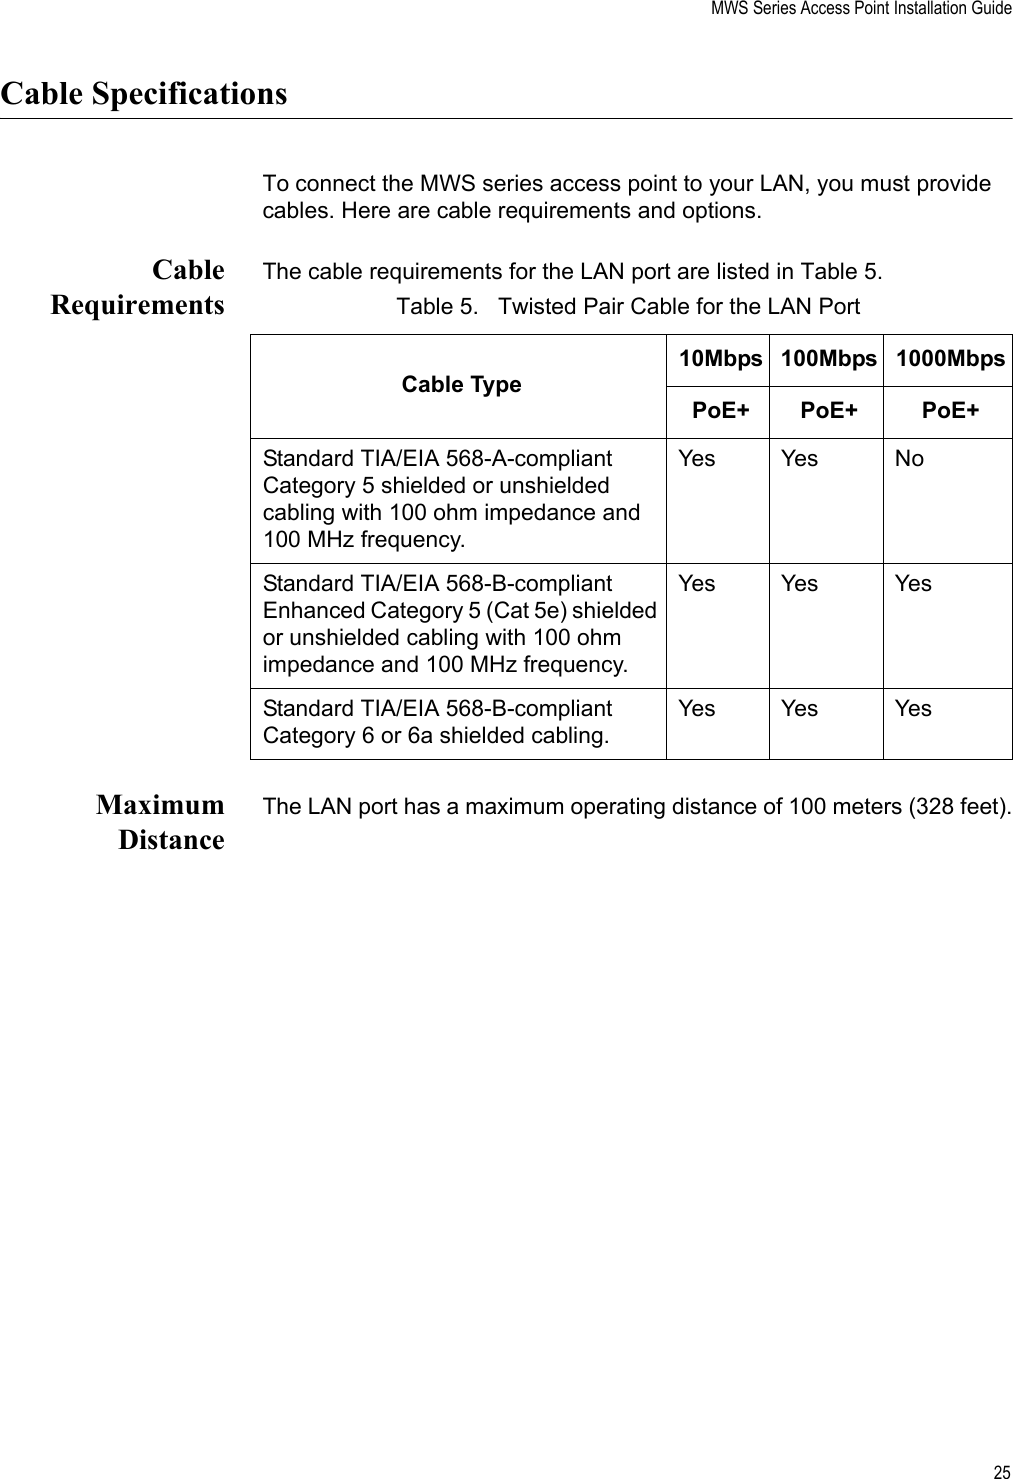 MWS Series Access Point Installation Guide25Cable SpecificationsTo connect the MWS series access point to your LAN, you must provide cables. Here are cable requirements and options.CableRequirementsThe cable requirements for the LAN port are listed in Table 5.MaximumDistanceThe LAN port has a maximum operating distance of 100 meters (328 feet).Table 5.   Twisted Pair Cable for the LAN PortCable Type10Mbps 100Mbps 1000MbpsPoE+ PoE+ PoE+Standard TIA/EIA 568-A-compliant Category 5 shielded or unshielded cabling with 100 ohm impedance and 100 MHz frequency.Yes Yes NoStandard TIA/EIA 568-B-compliant Enhanced Category 5 (Cat 5e) shielded or unshielded cabling with 100 ohm impedance and 100 MHz frequency.Yes Yes YesStandard TIA/EIA 568-B-compliant Category 6 or 6a shielded cabling.Yes Yes Yes